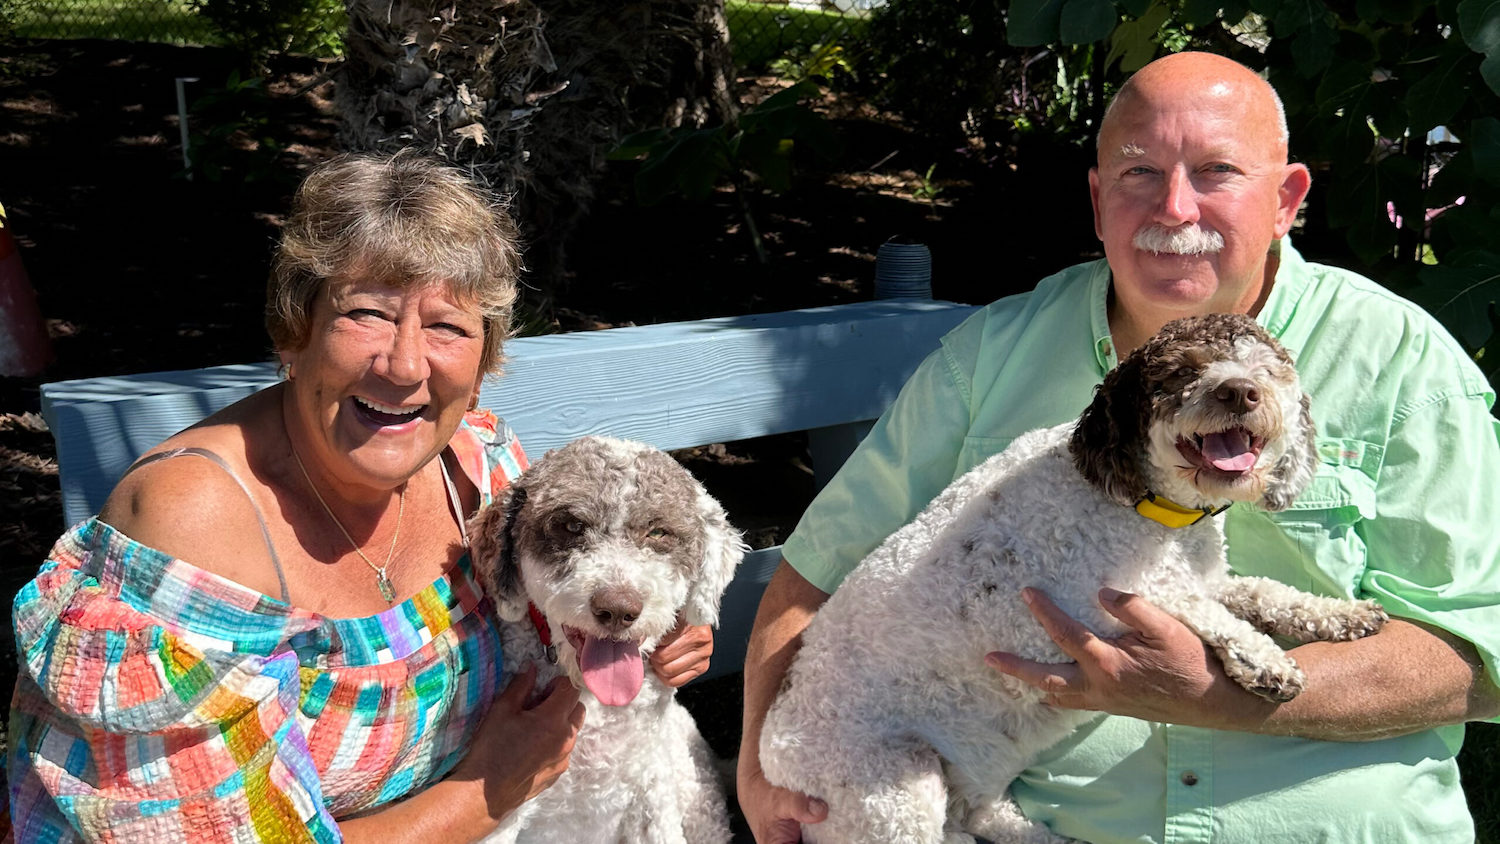 Dr. Jackie Jaloszynski and Sid Bragg pose with their Lagotto Romagnolo puppies, Hudson and Bella, near their home in North Carolina's Crystal Coast. (Courtesy of Jackie Jaloszynski)